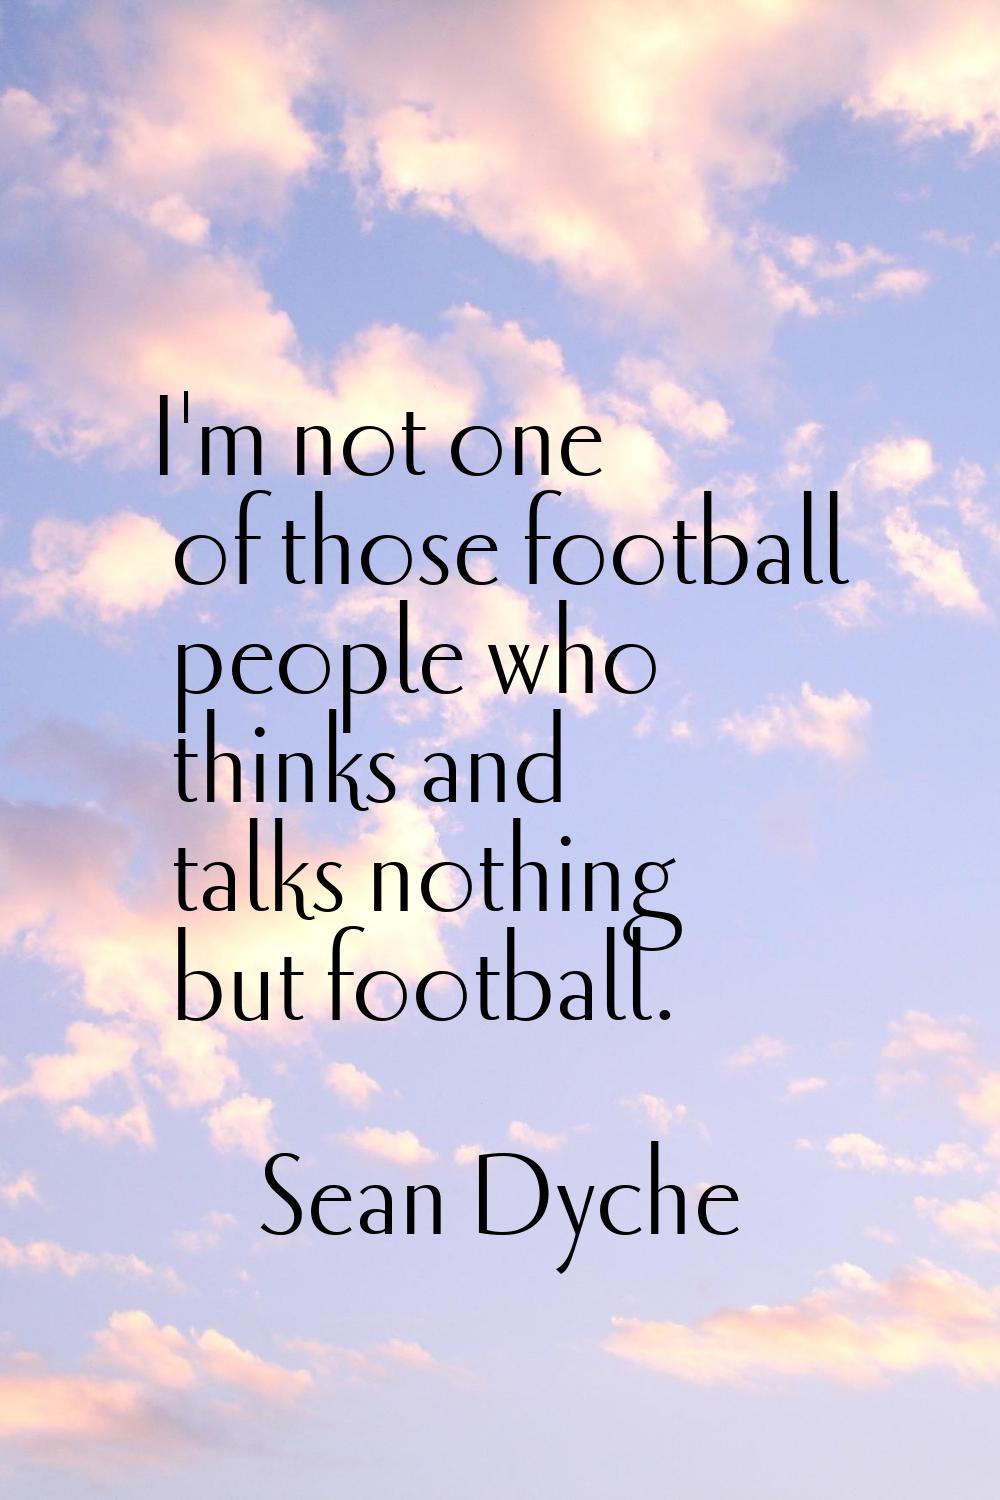 I'm not one of those football people who thinks and talks nothing but football.